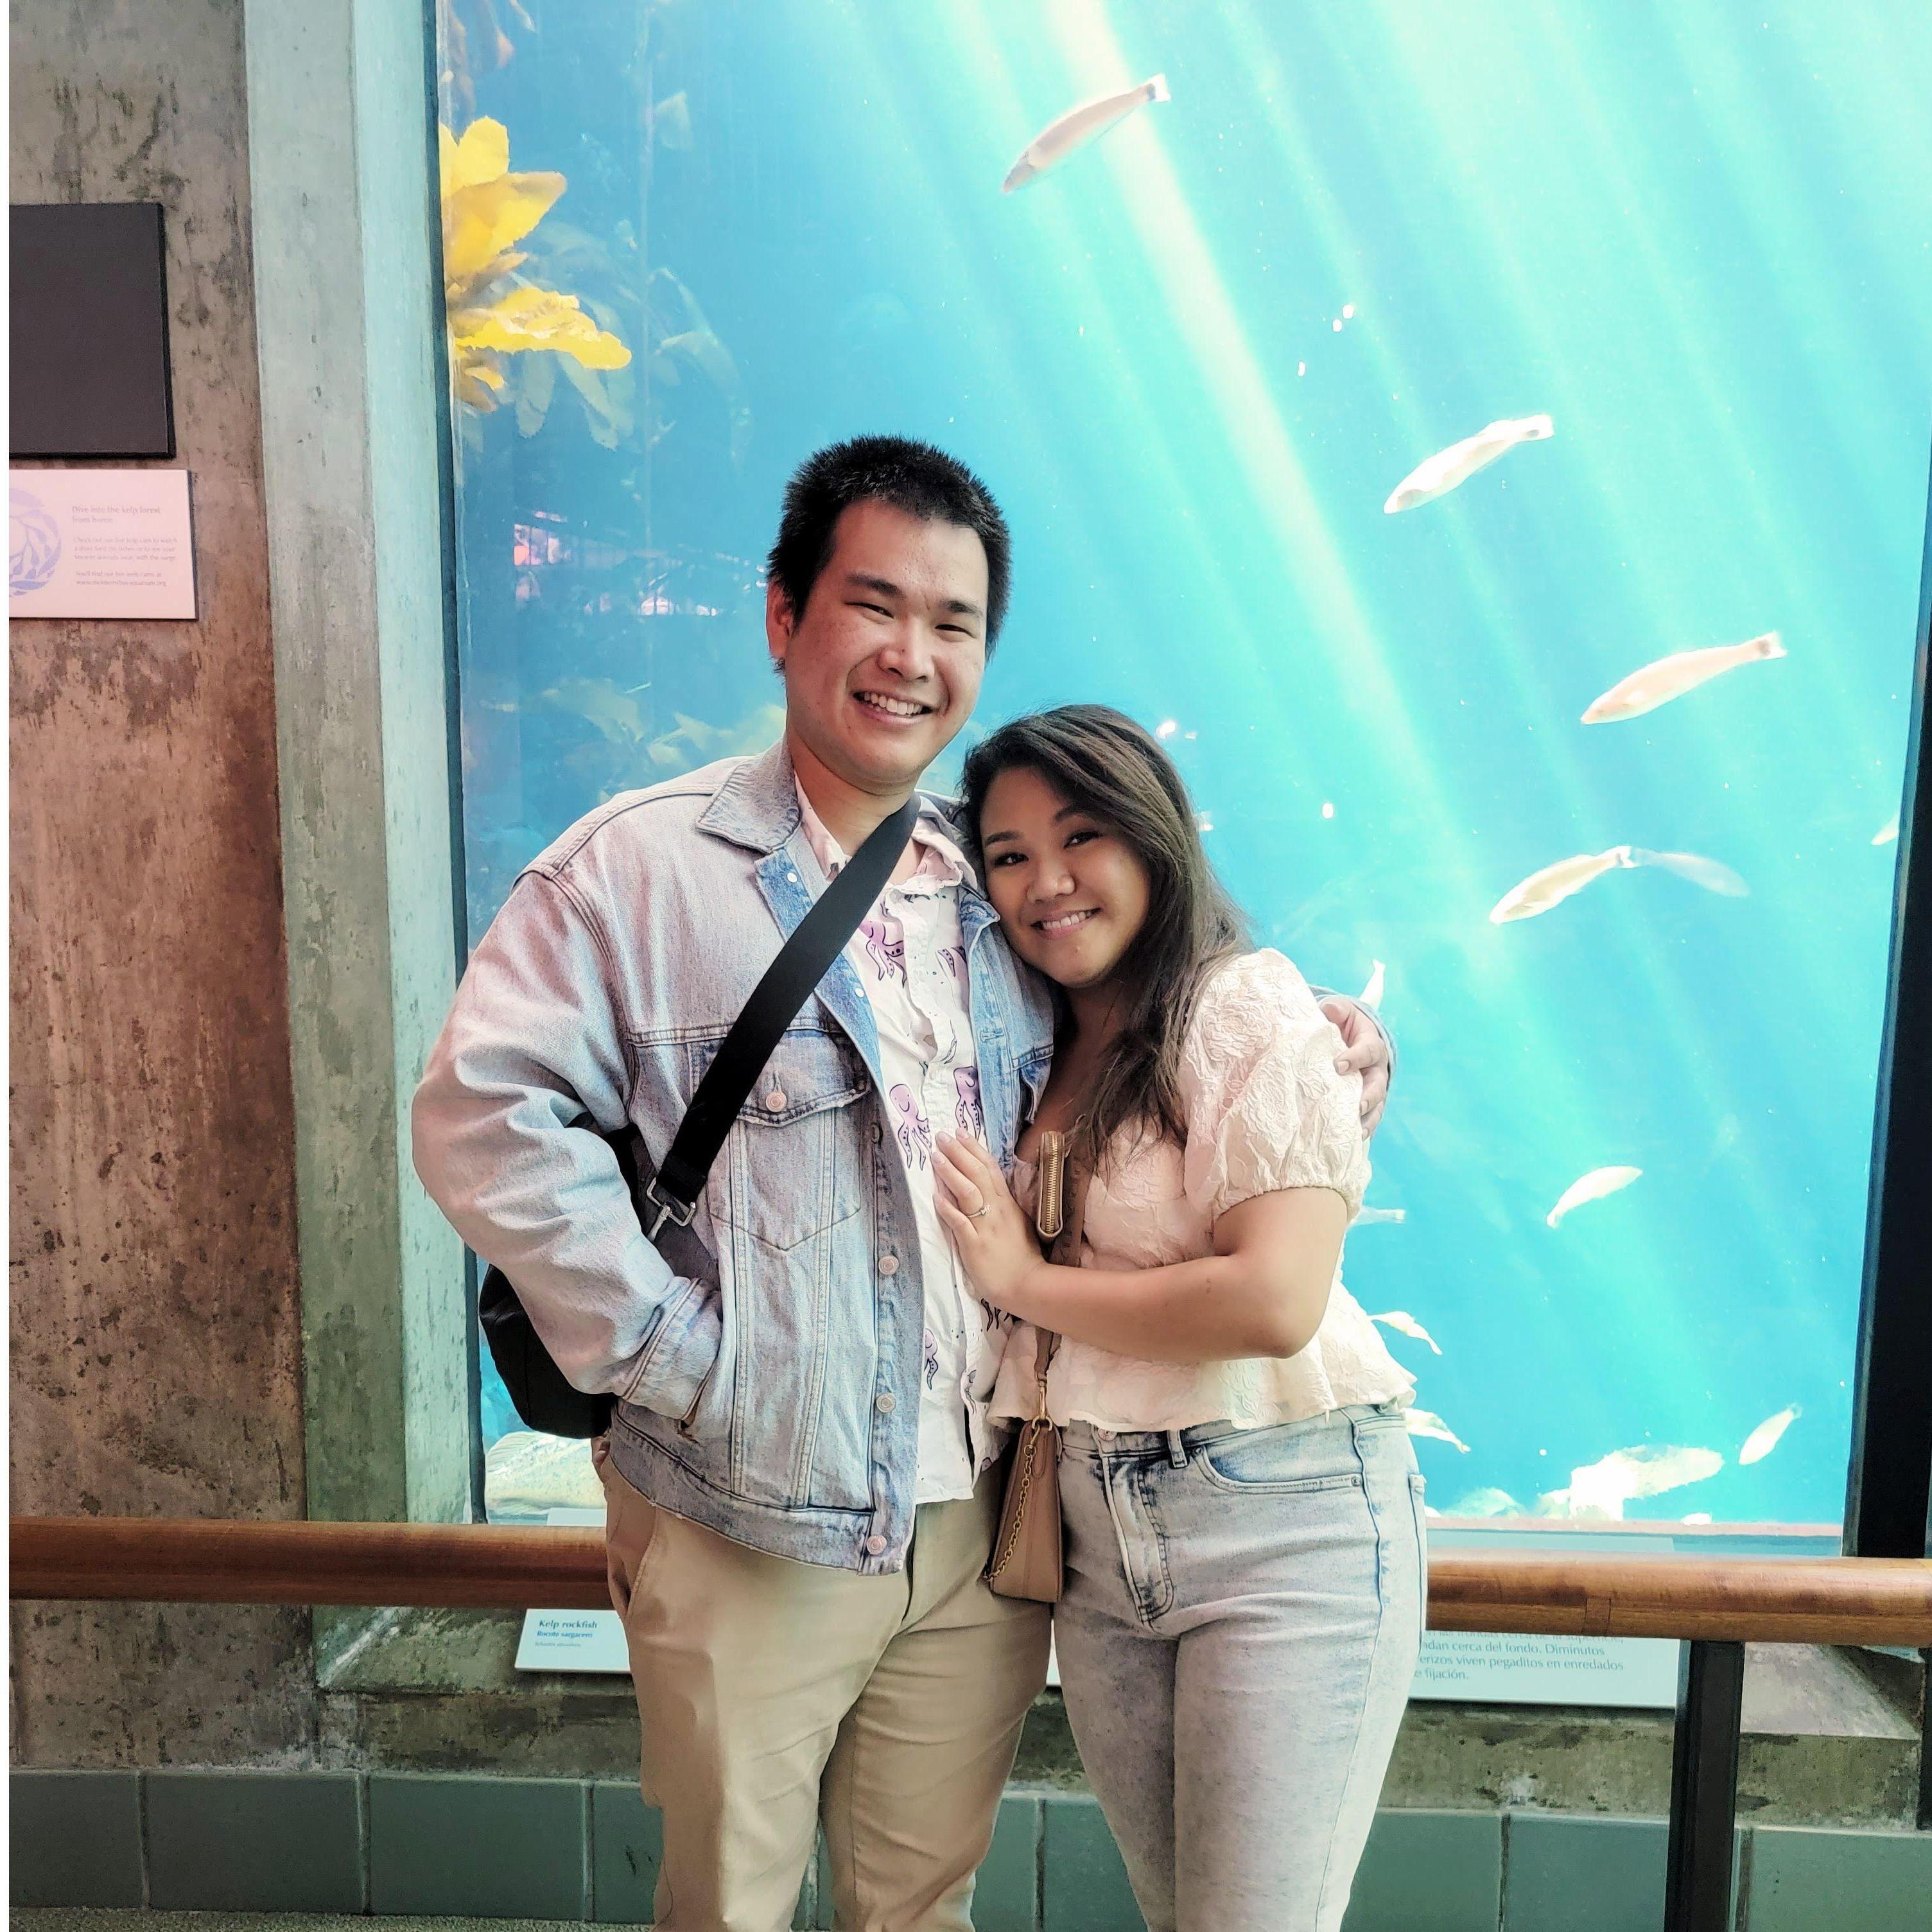 Looking cute in front of the fishes!